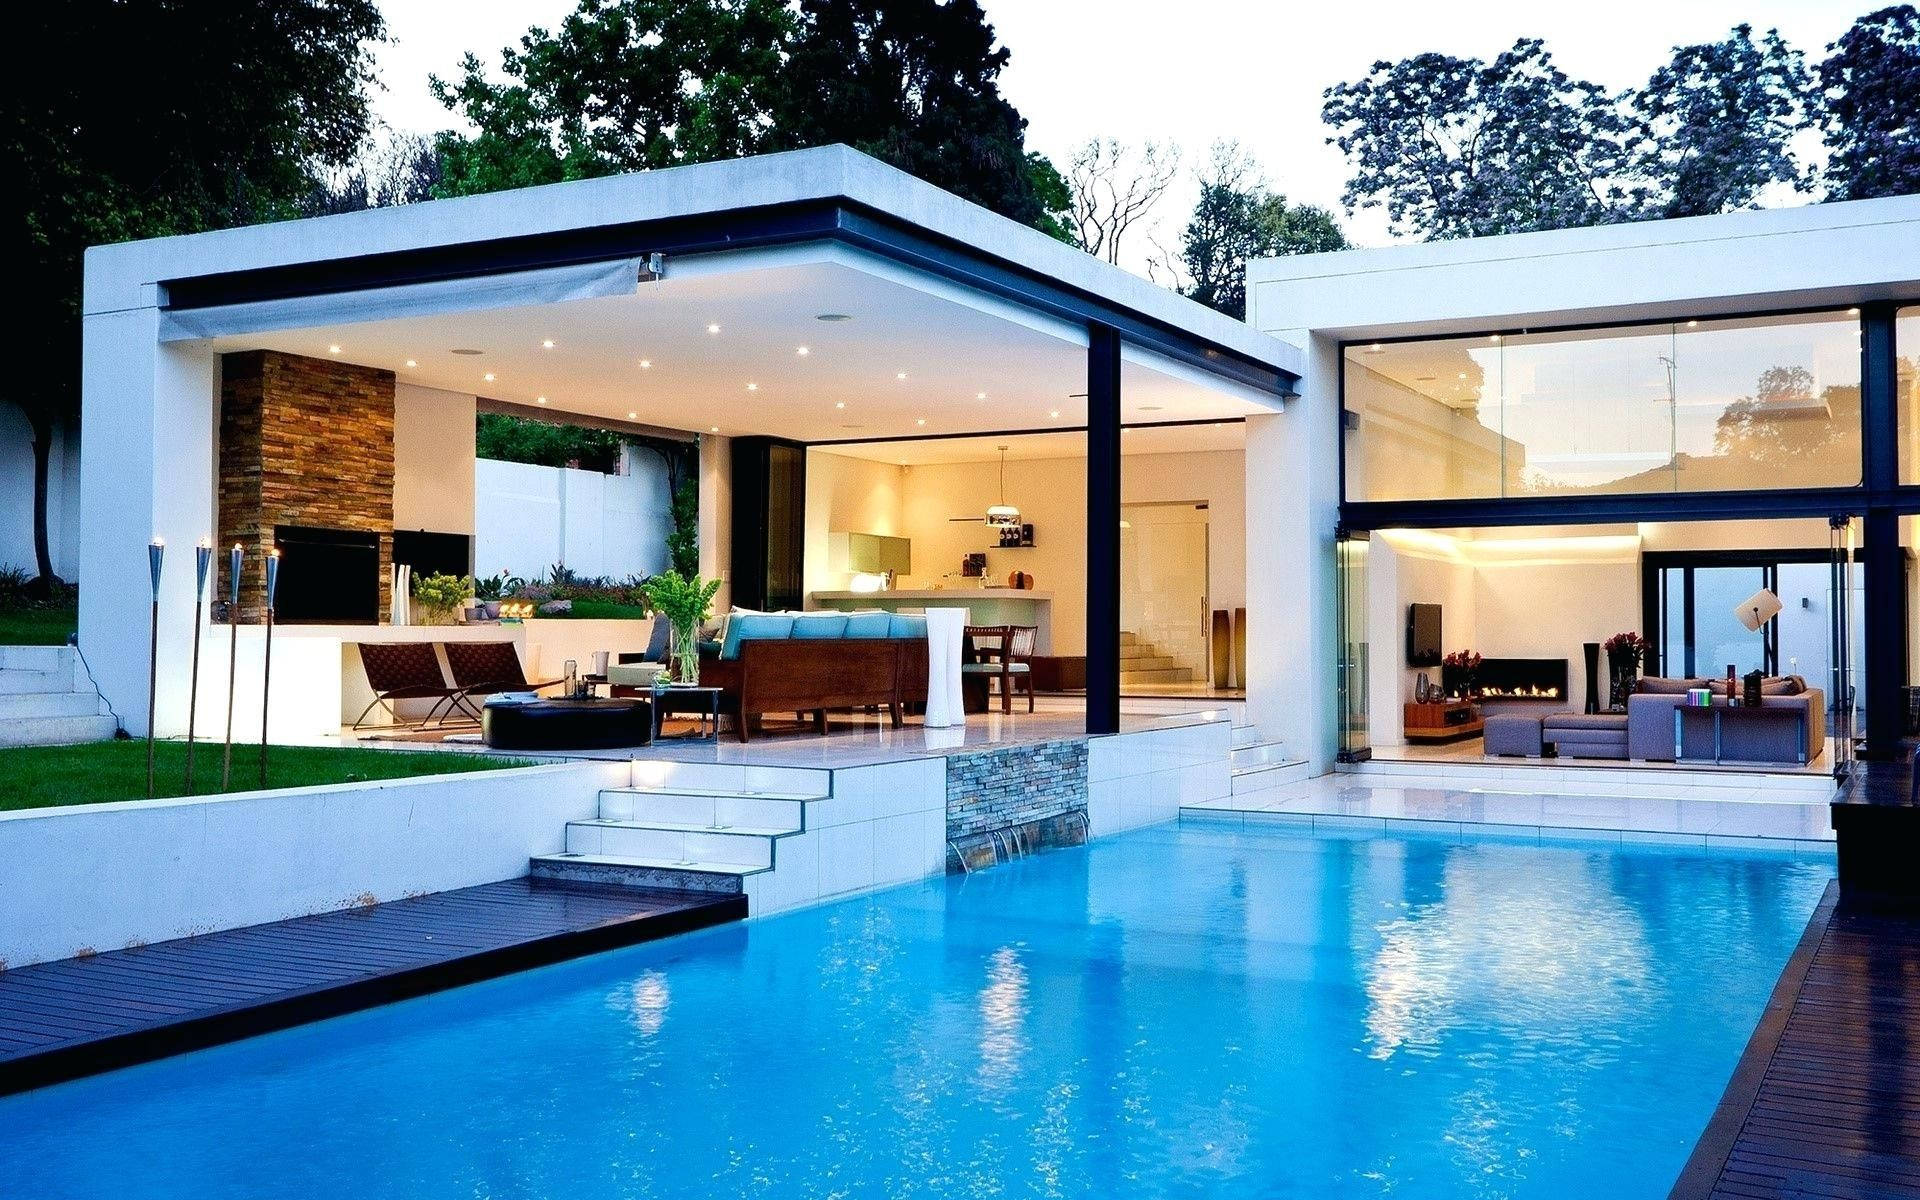 Square-type House With Pool